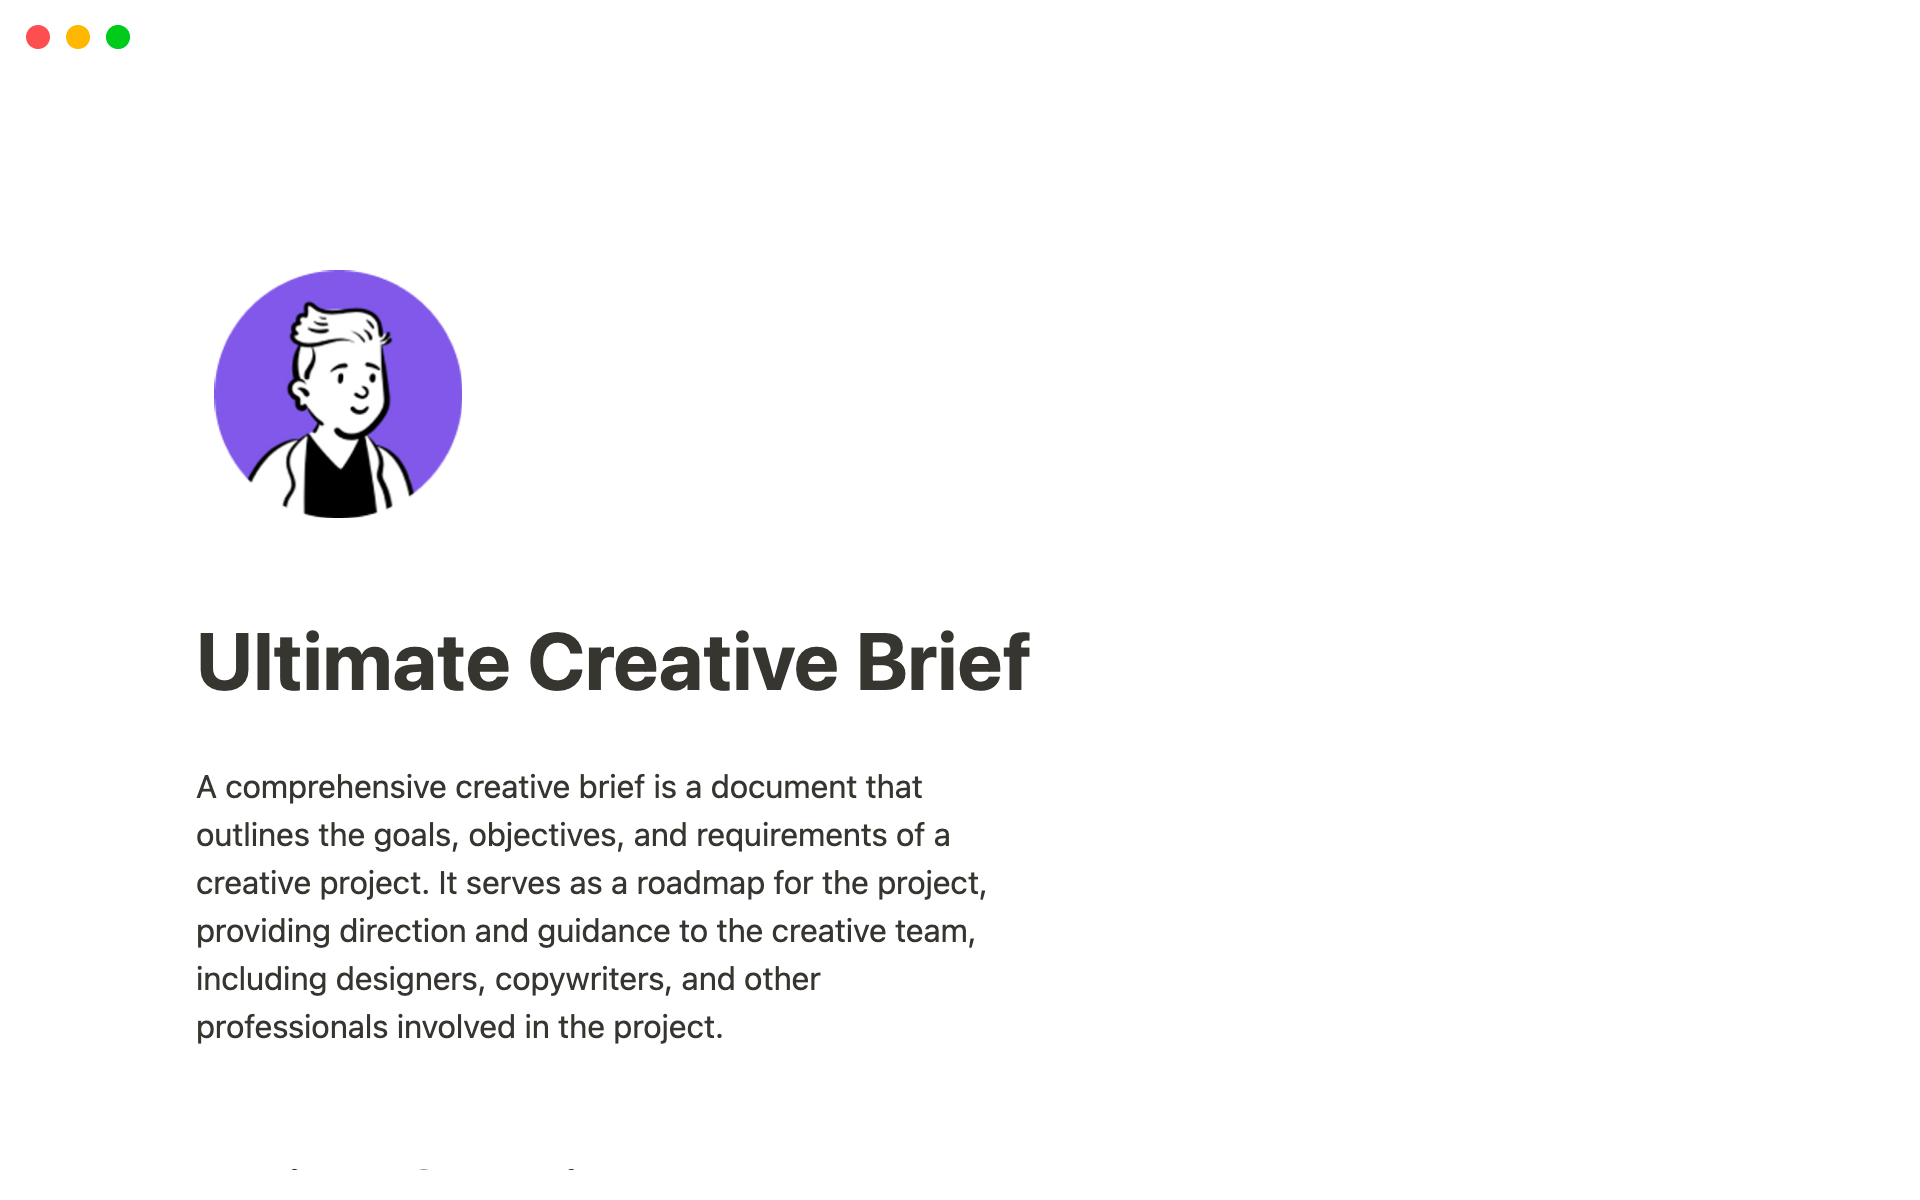 Collect the whole scope of your creative project in one document.